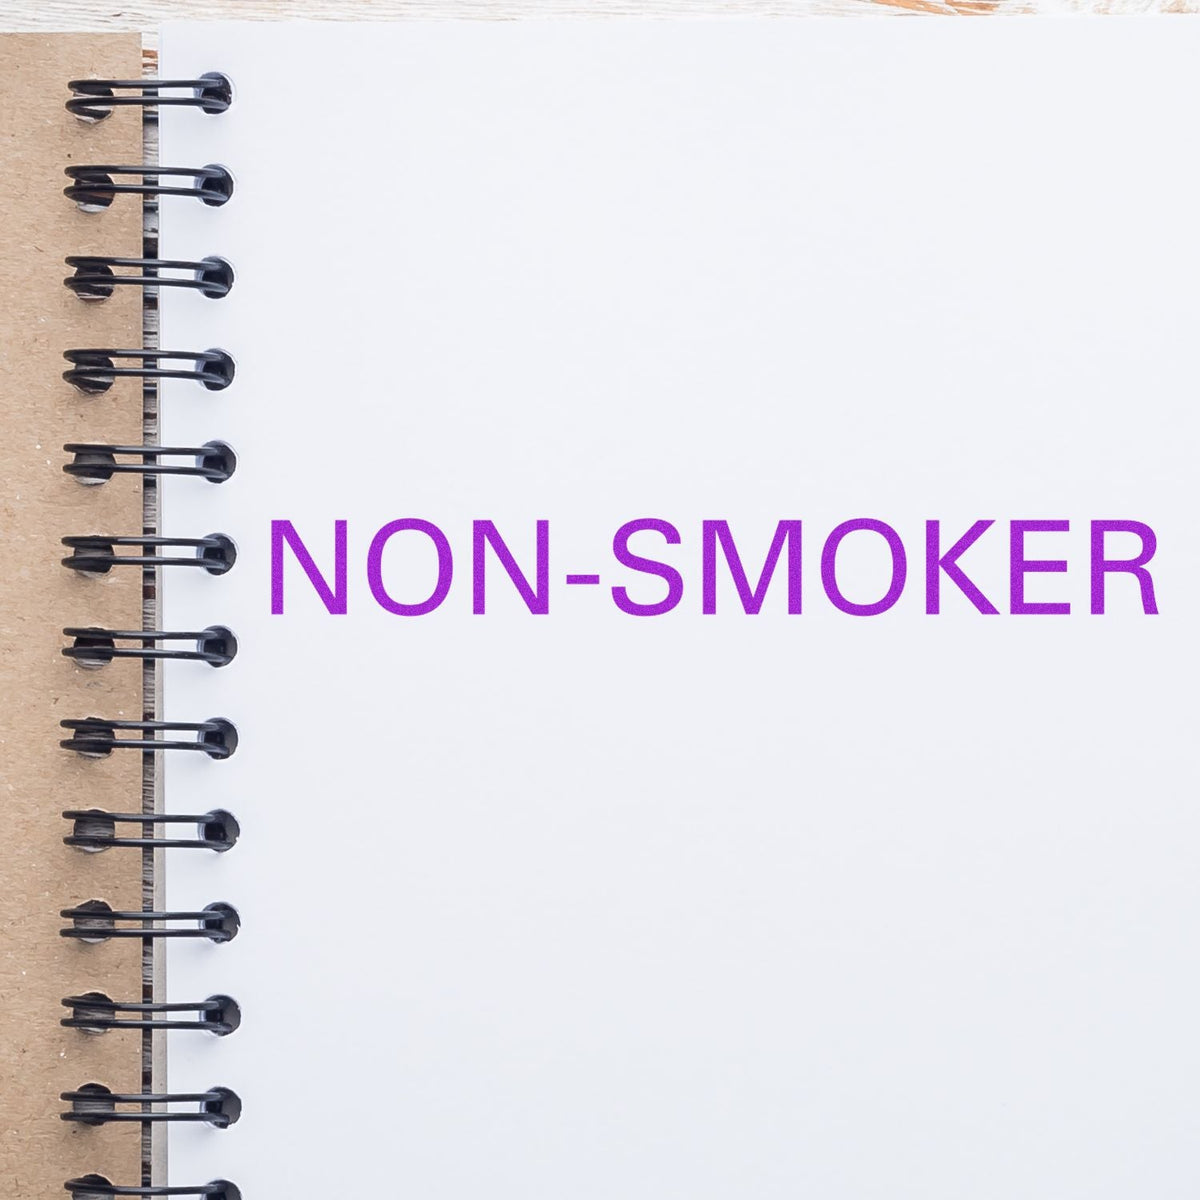 Self-Inking Non-Smoker Stamp In Use